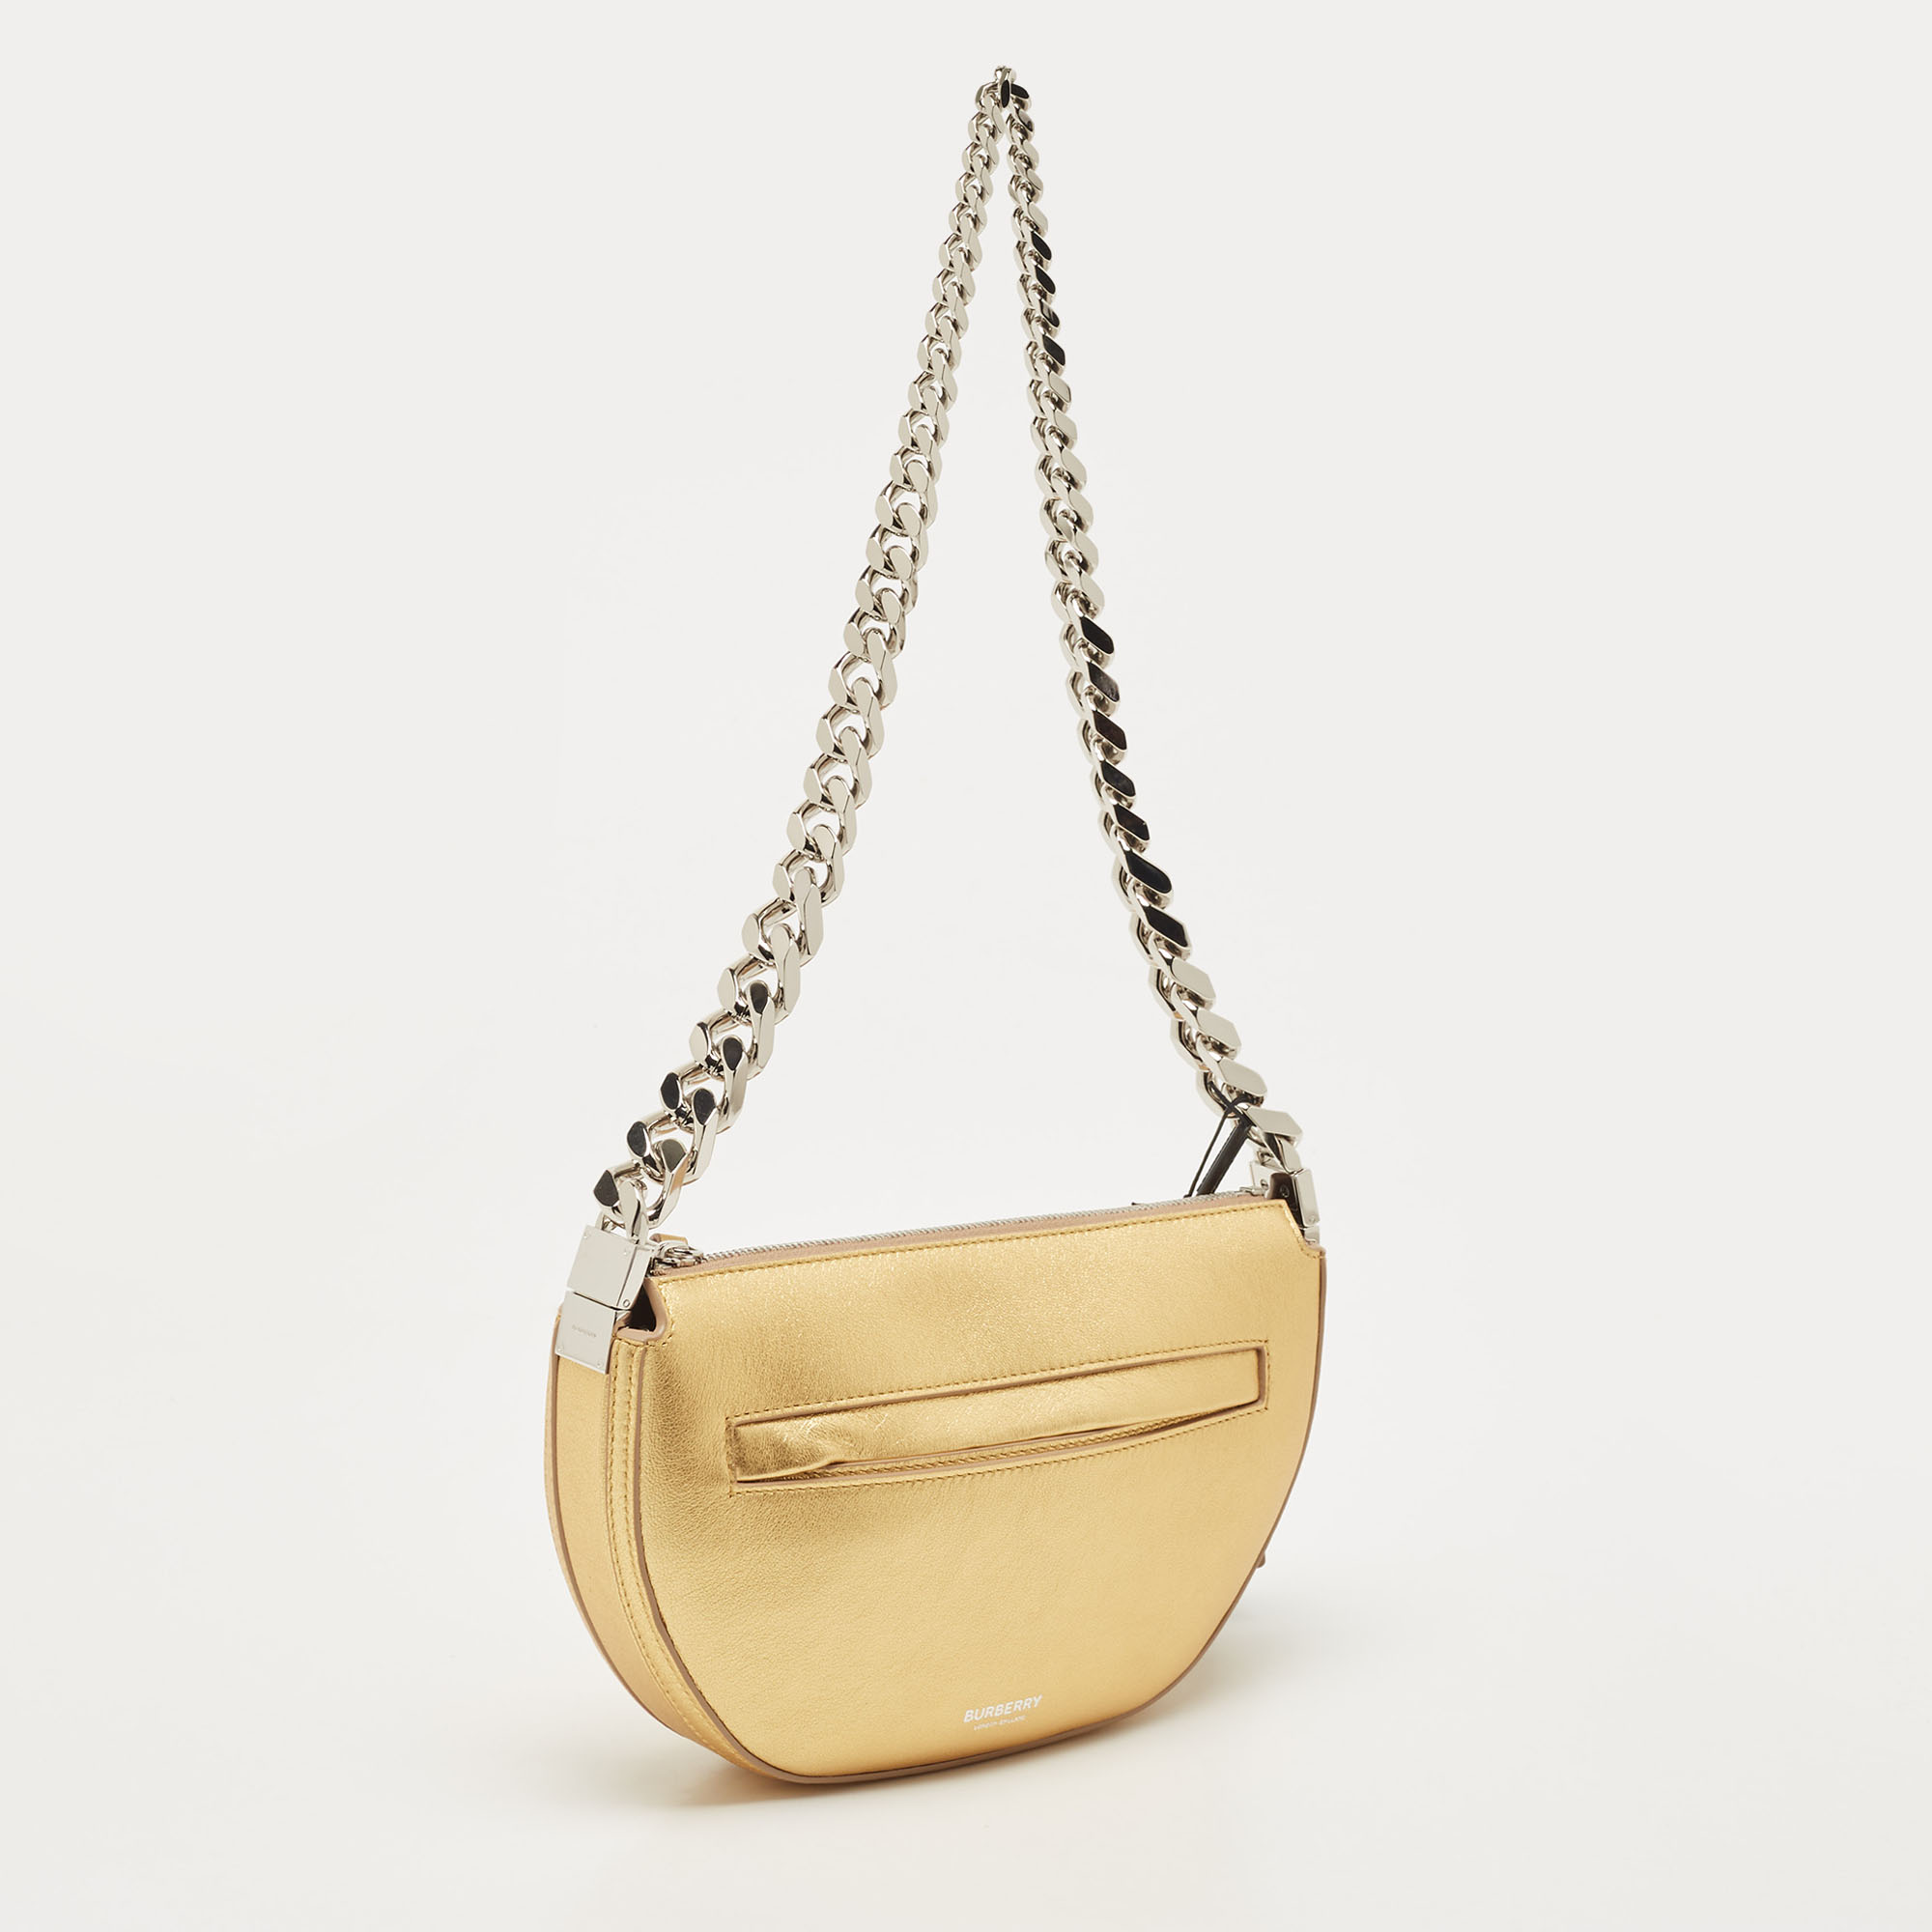 Burberry Gold Leather Mini Olympia Zip Chain Bag